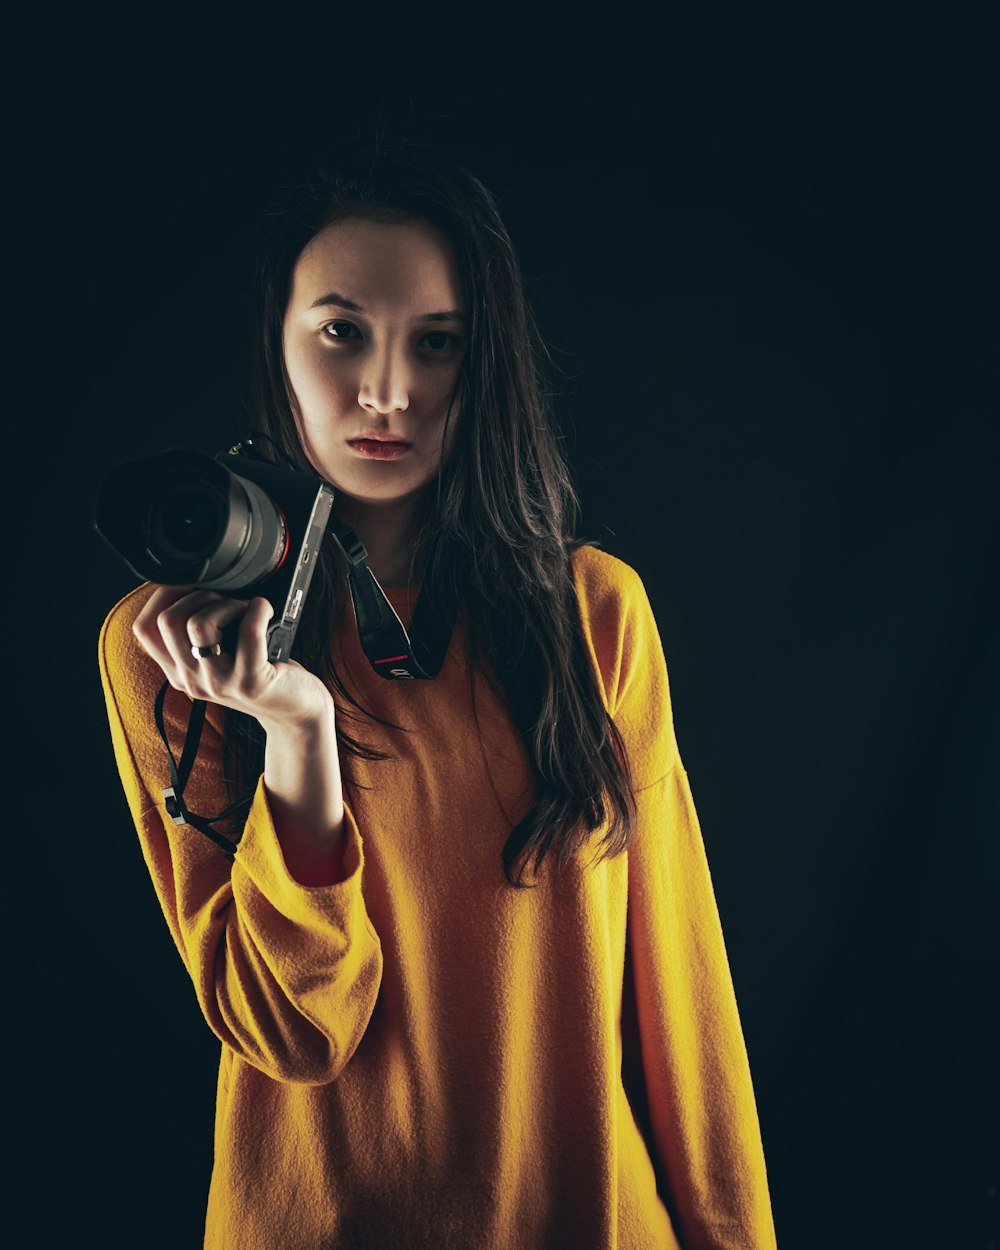 a woman in a yellow shirt holding a camera